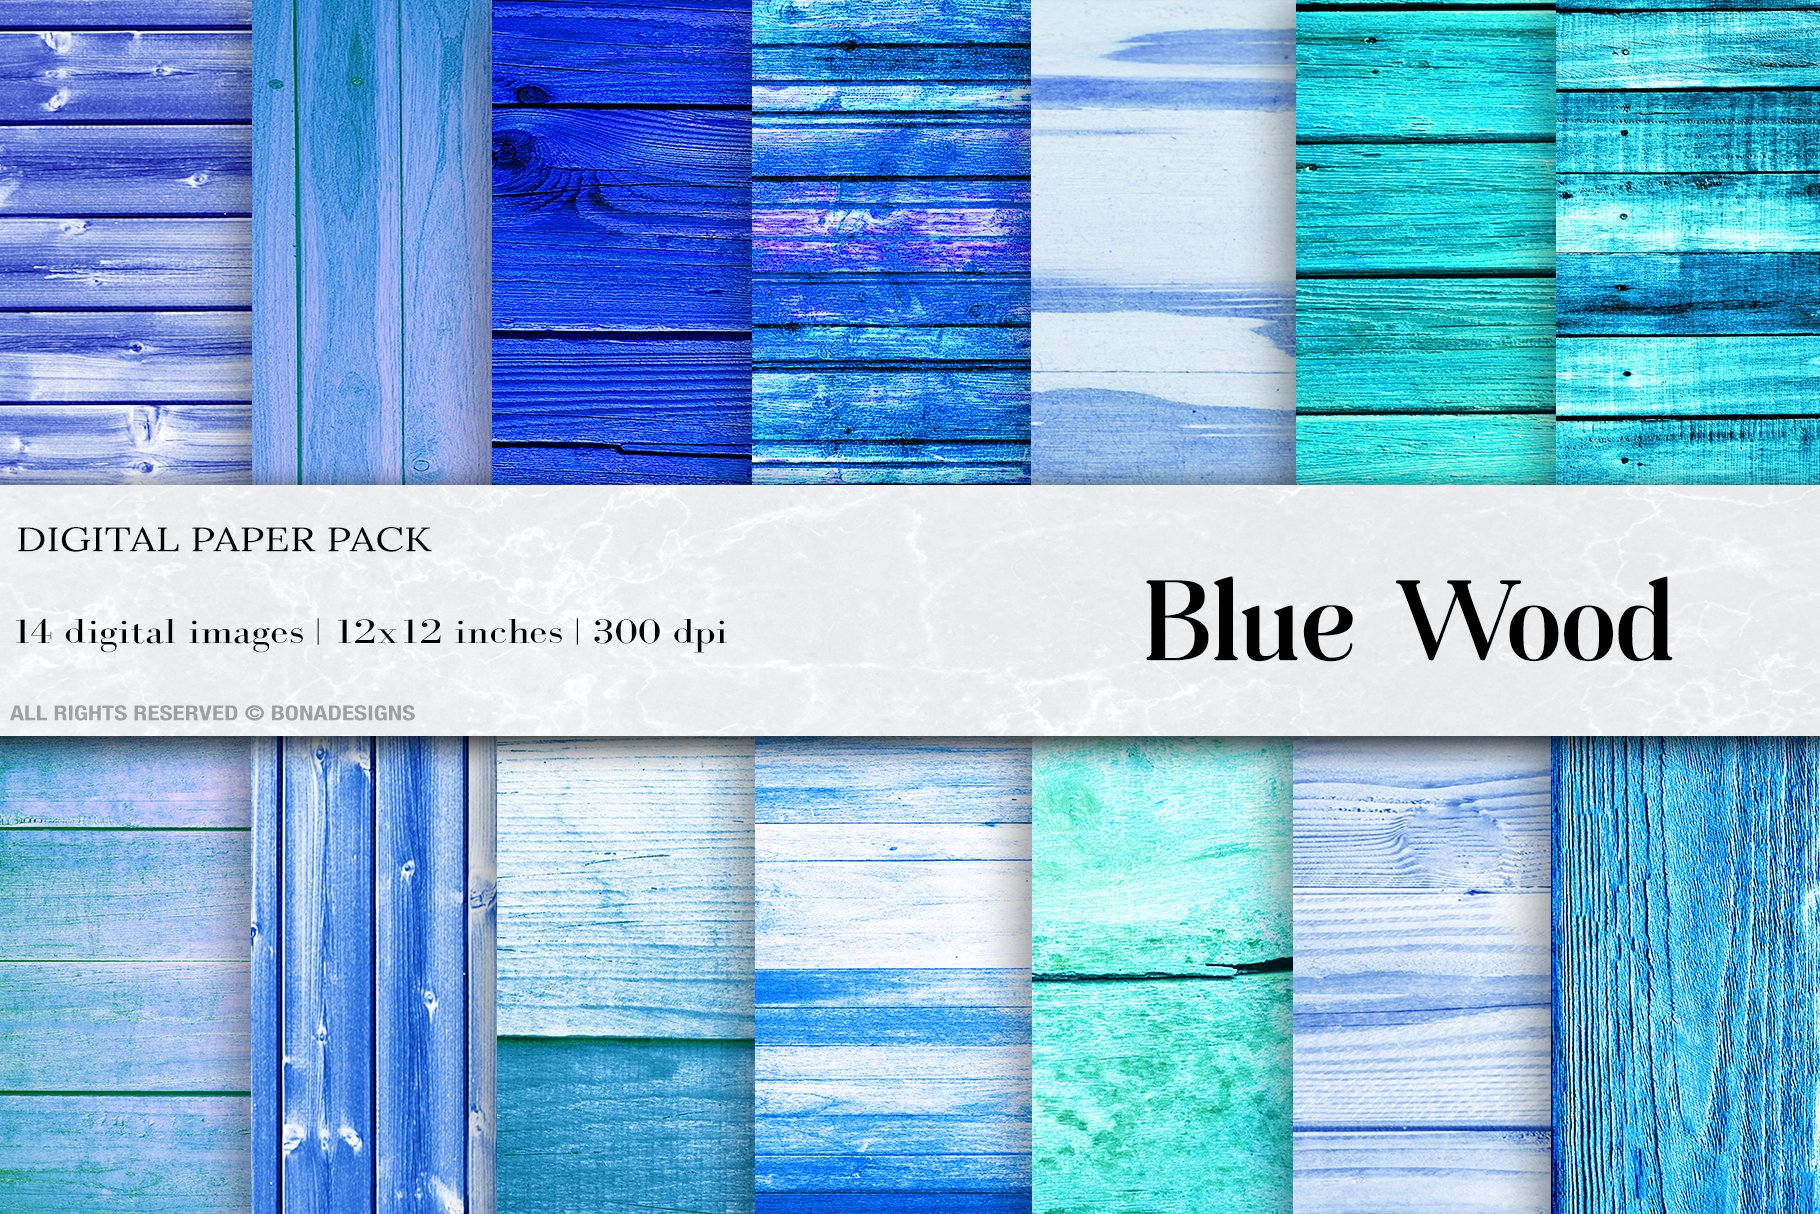 Wood Digital Papers, Blue Wood cover image.